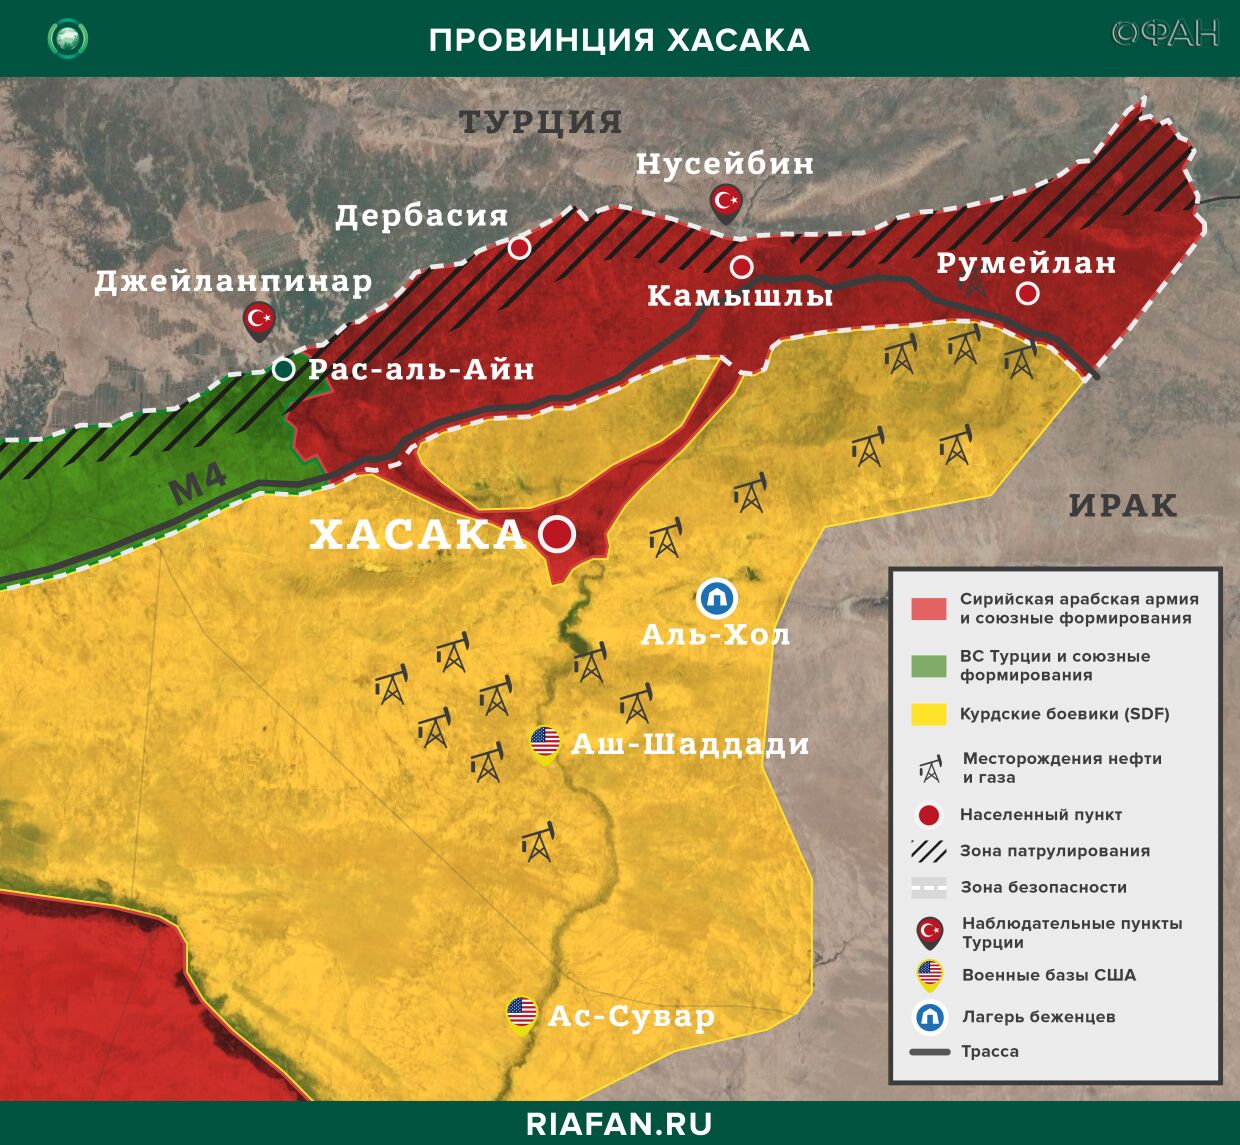 Syria the results of the day on 5 September 06.00: Turkey is suspected of preparing an offensive in the SAR